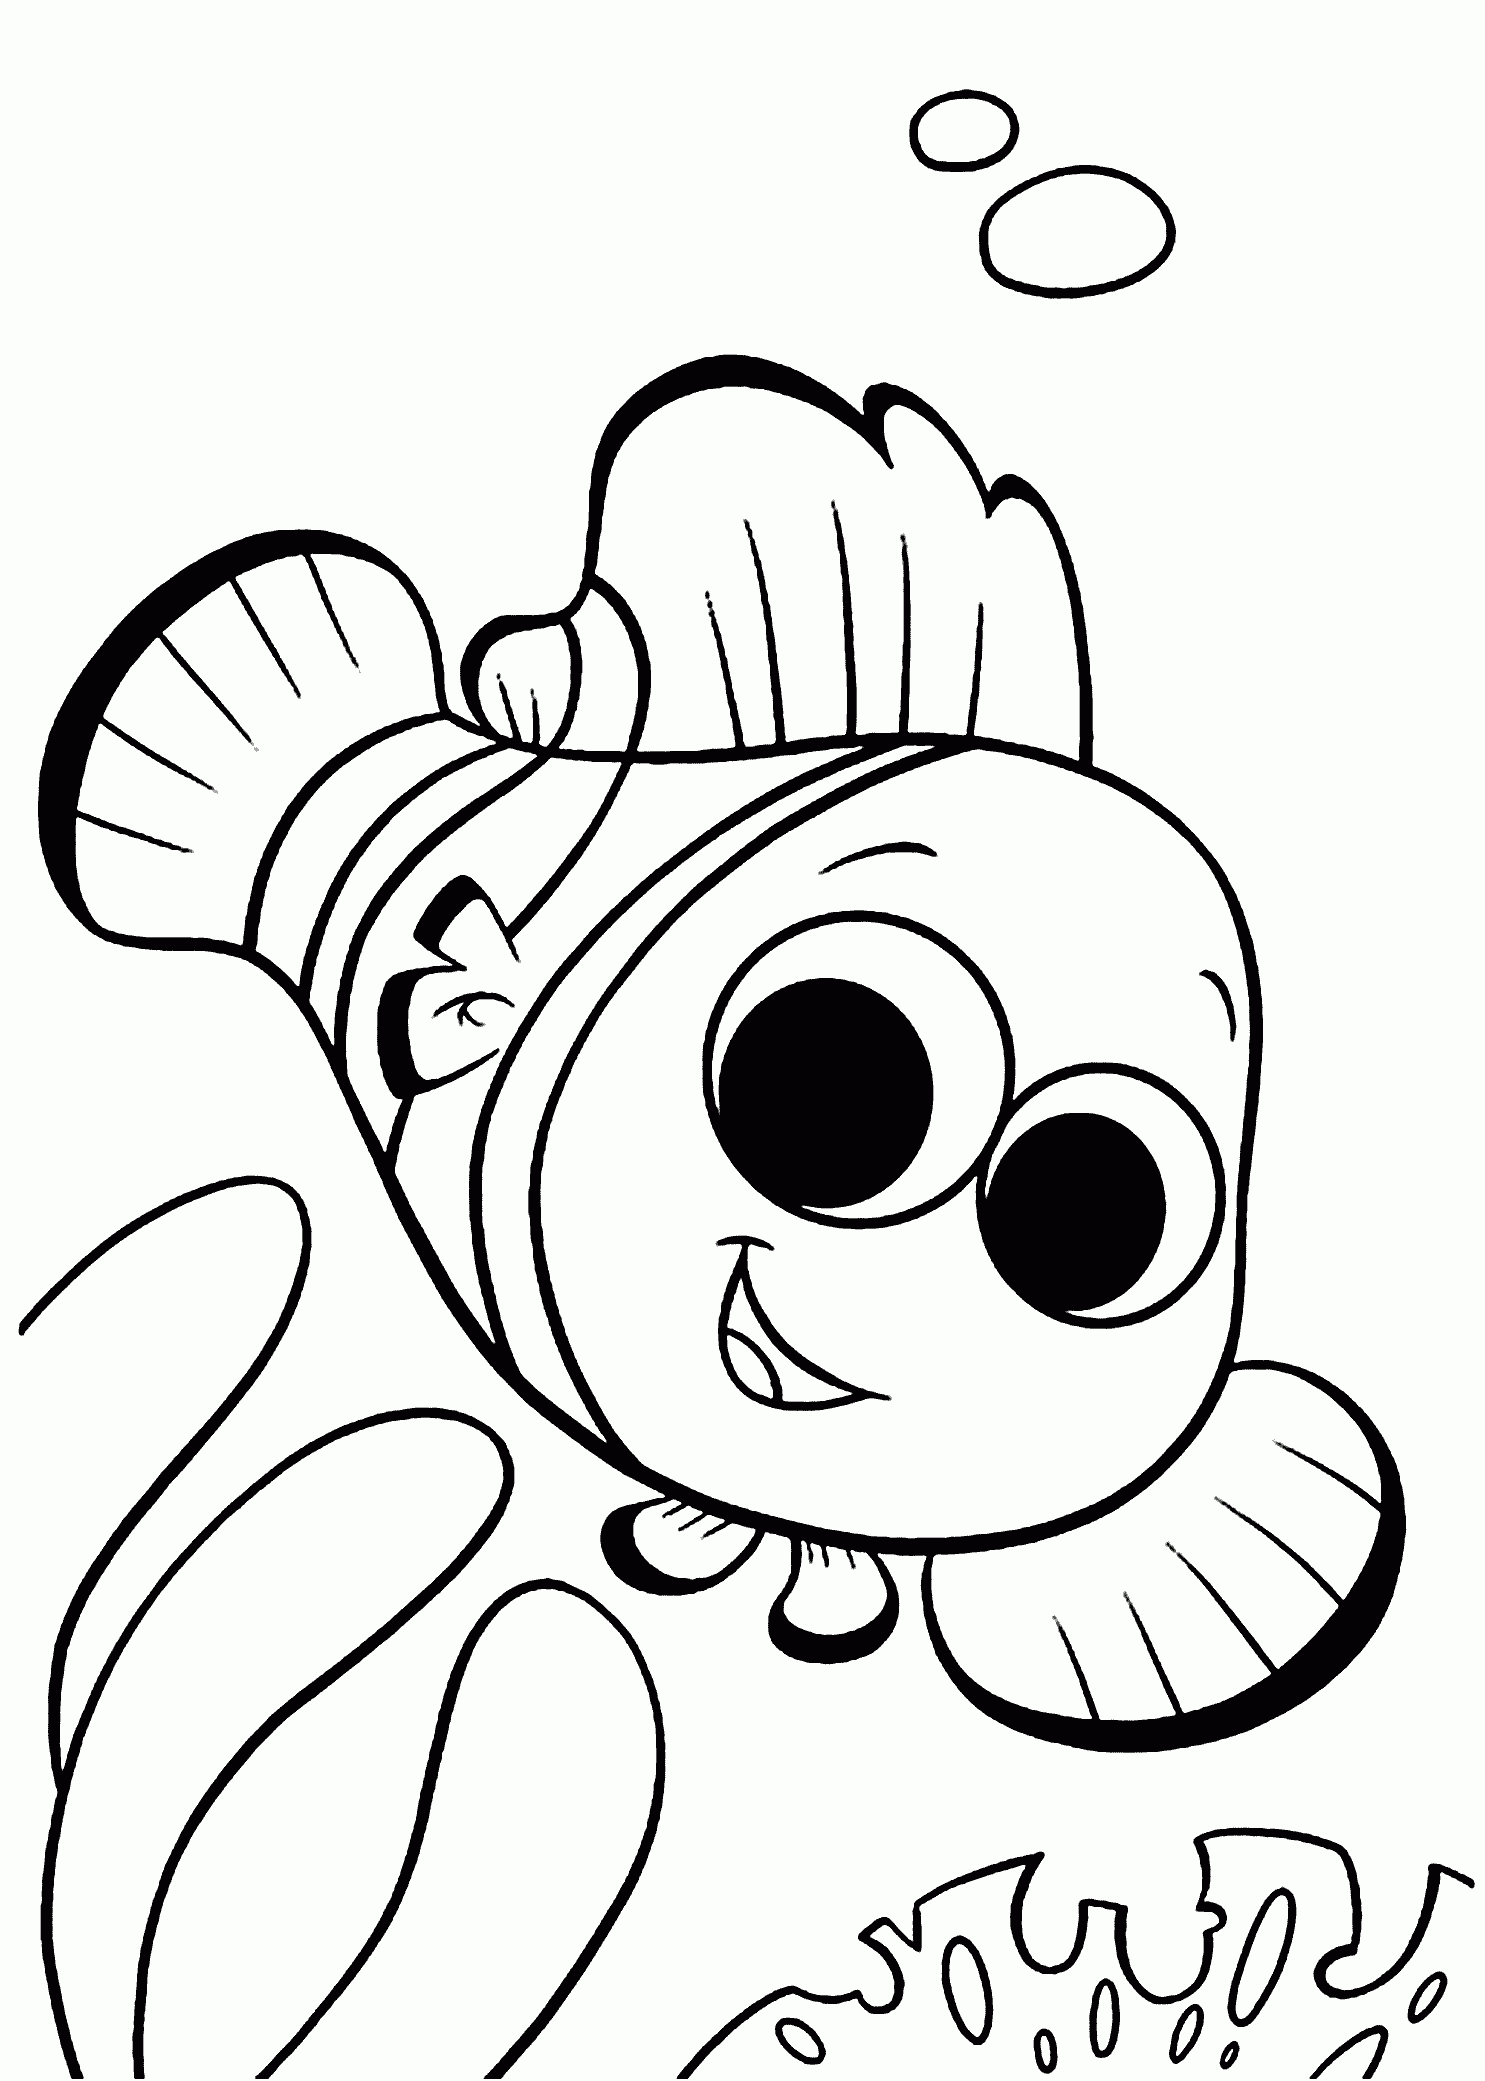 best Finding Nemo coloring pages for kids printable free Coloring impressive principles – free coloring pages for children\\u0026#39;s church